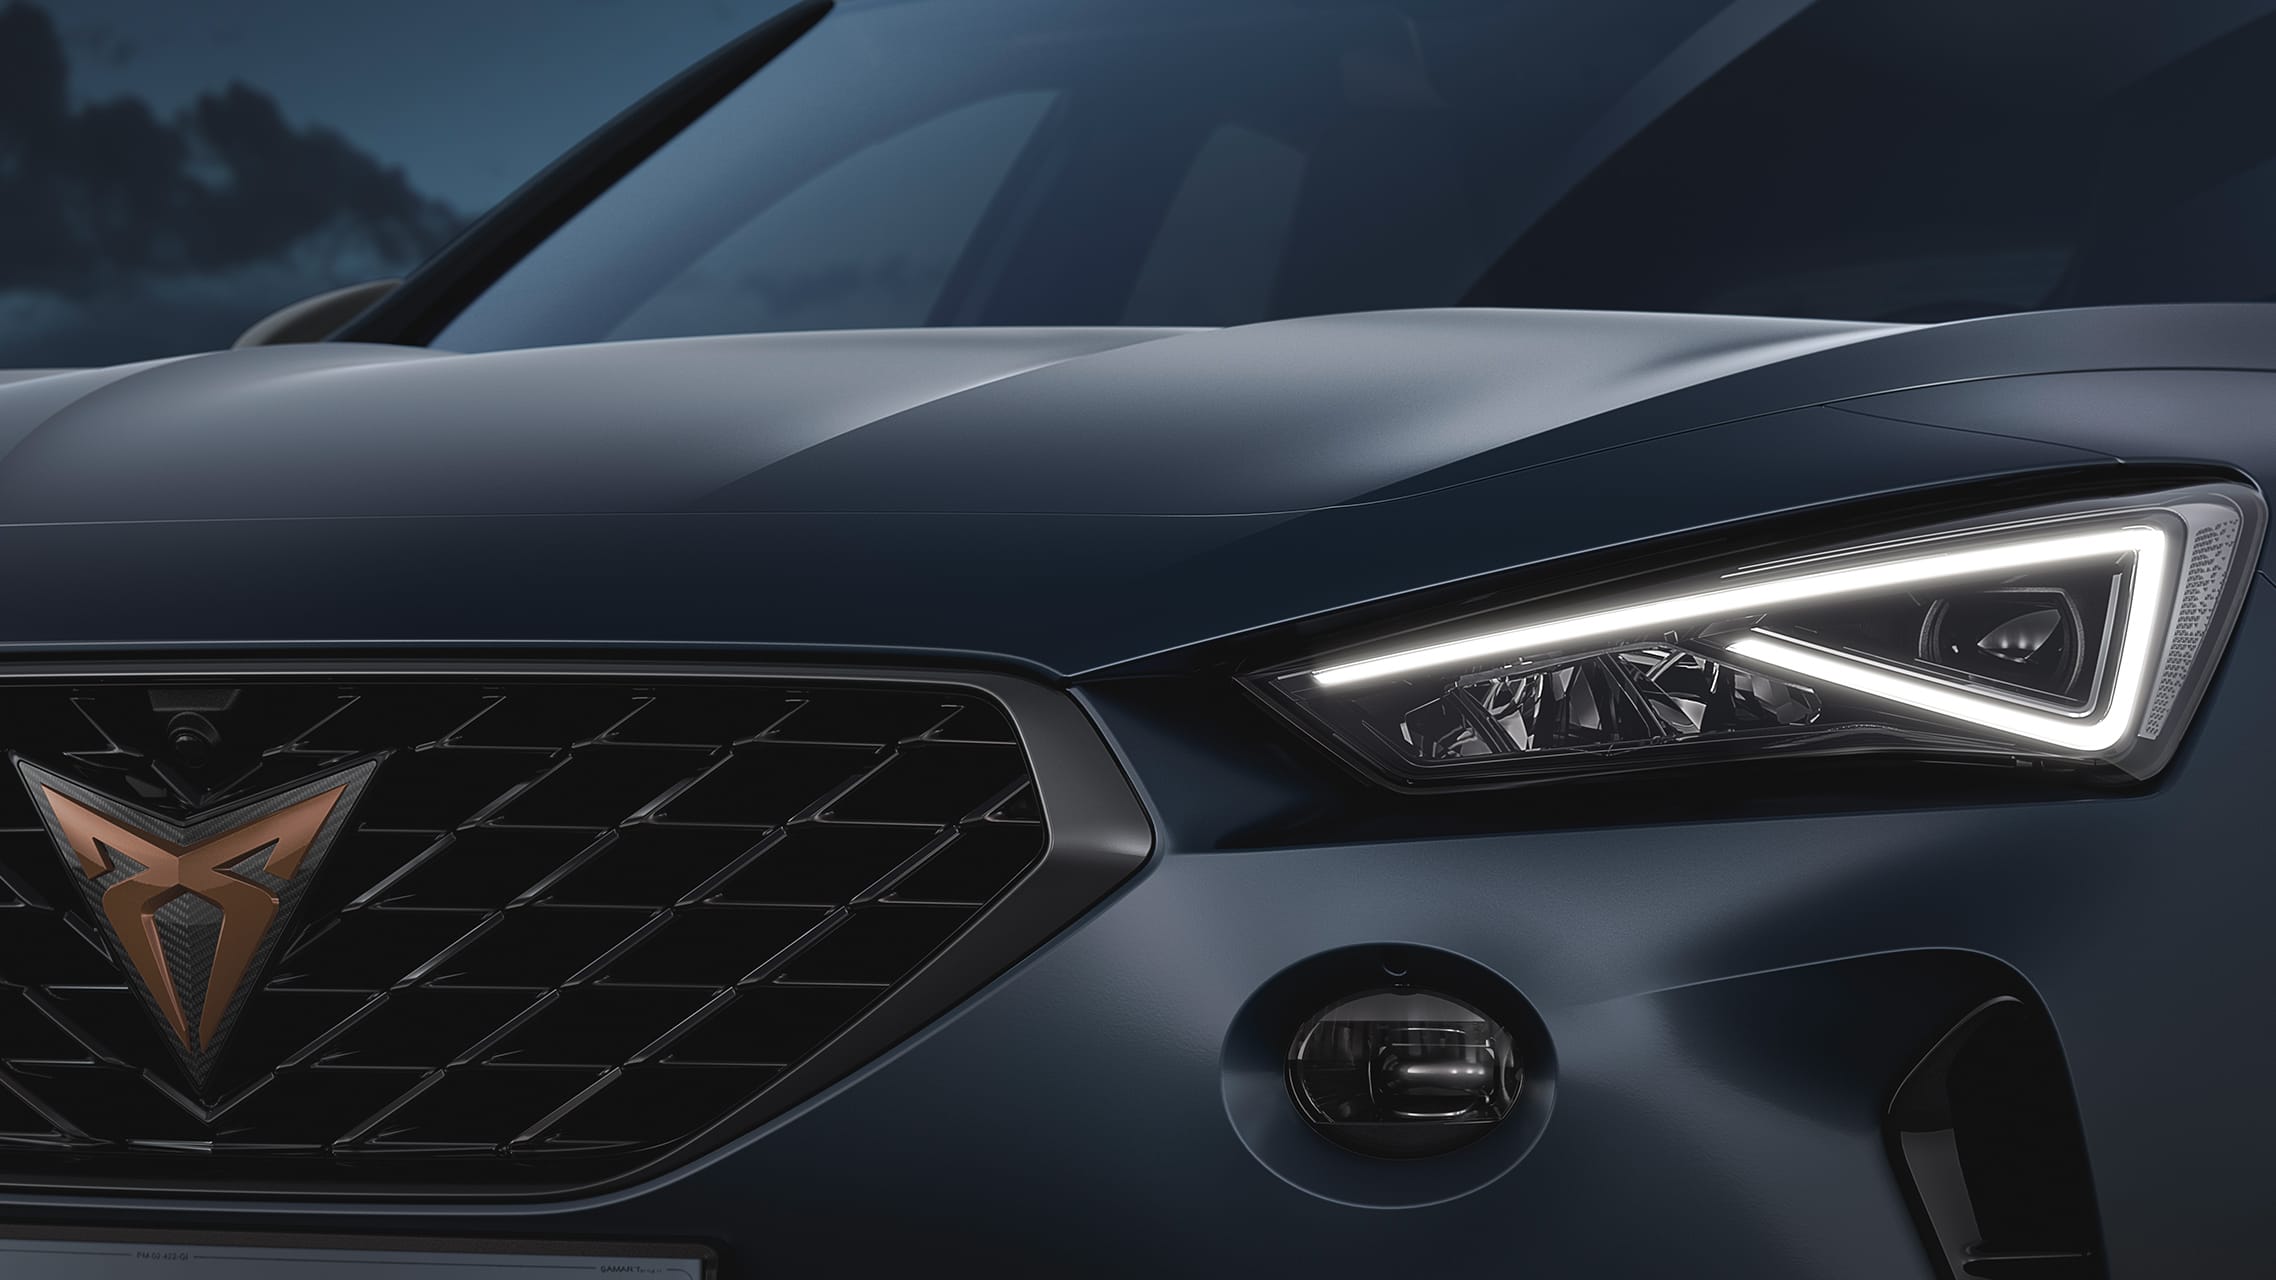 new cupra formentor compact suv with chromed front grille adorned with CUPRA logo